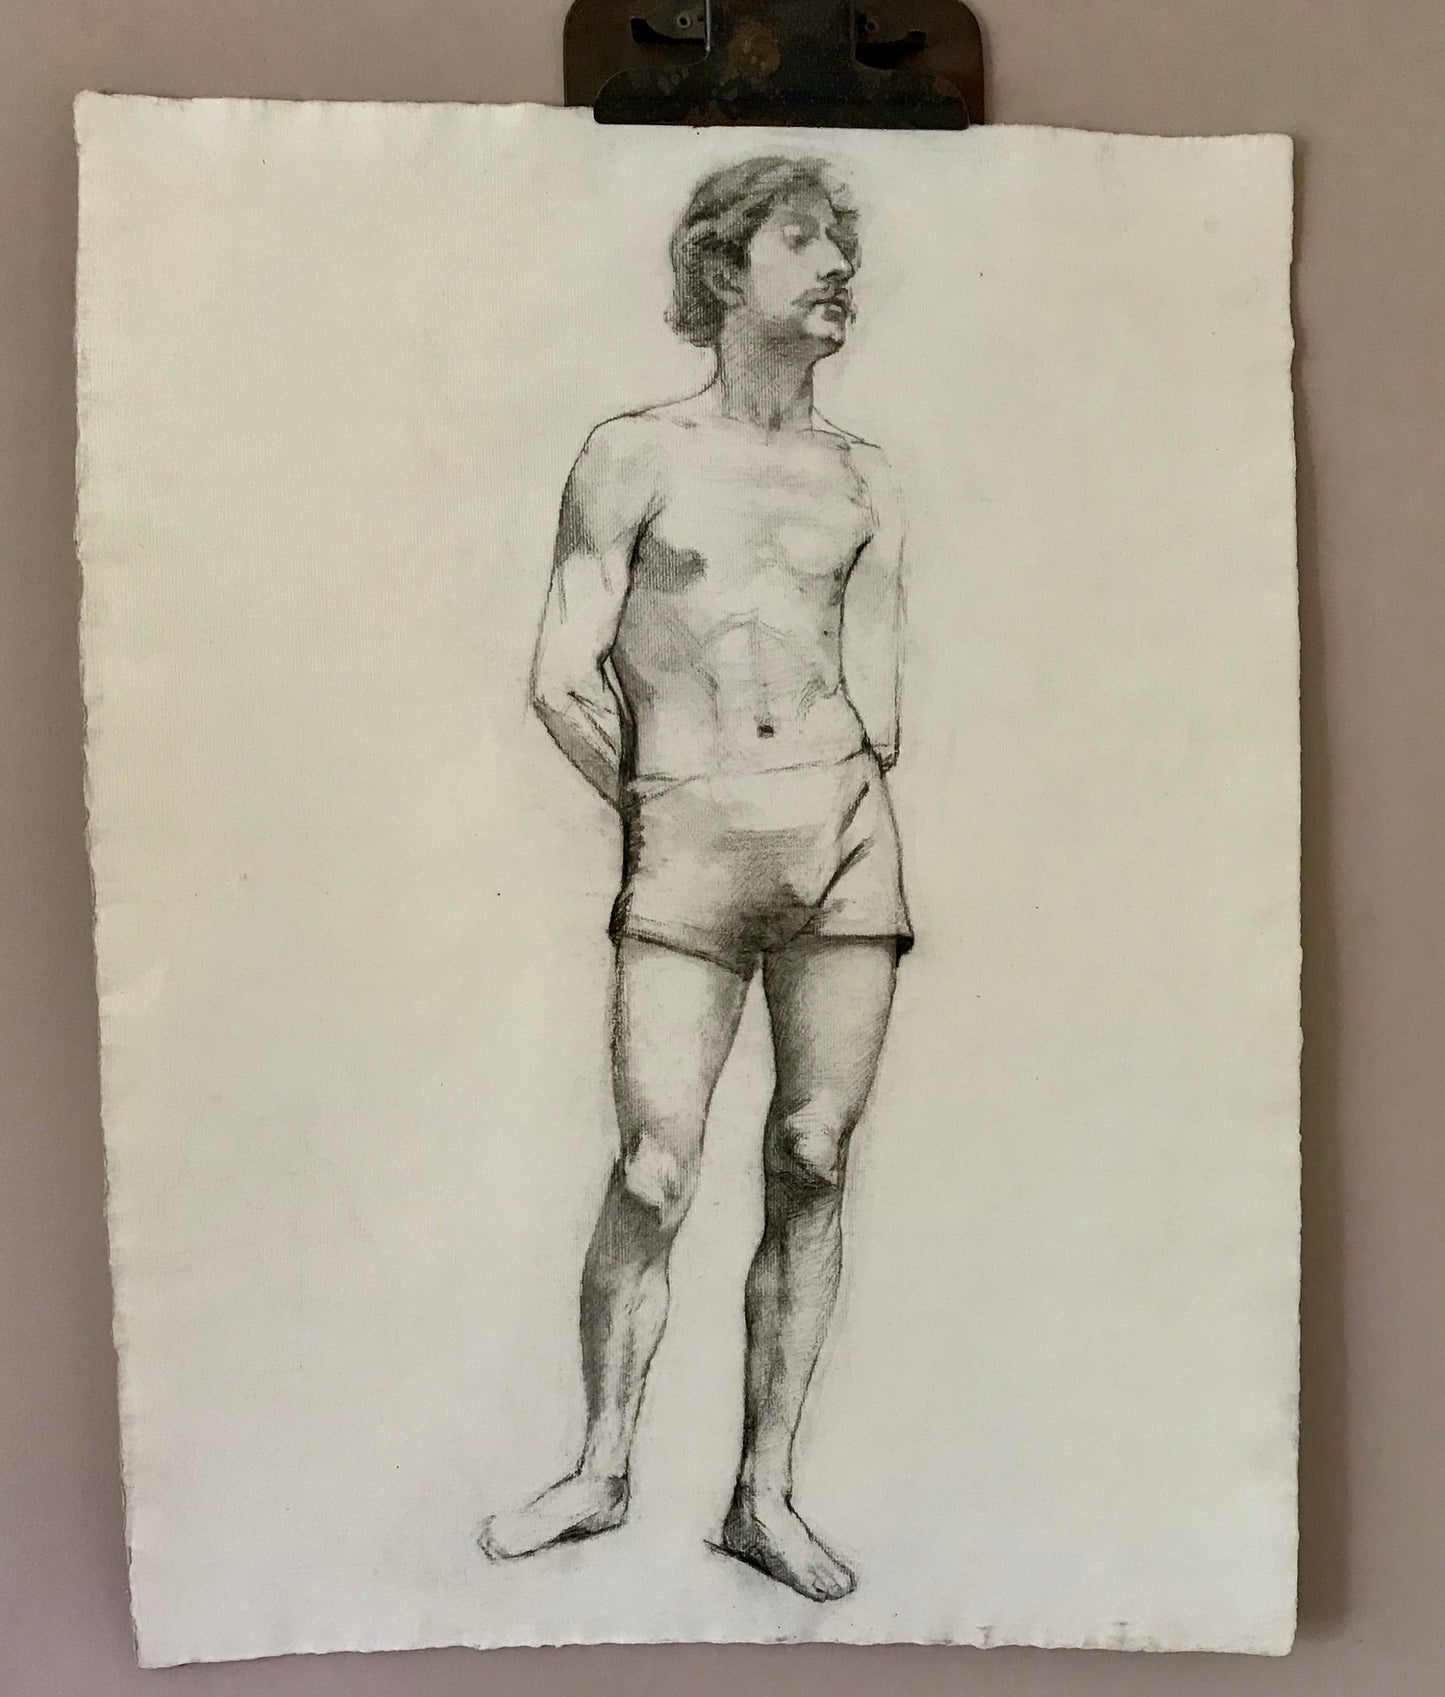 A Original Charcoal Life Drawing of a Man. A French Art School Piece. Early 1900’s. Large: 63 x 48 cms.